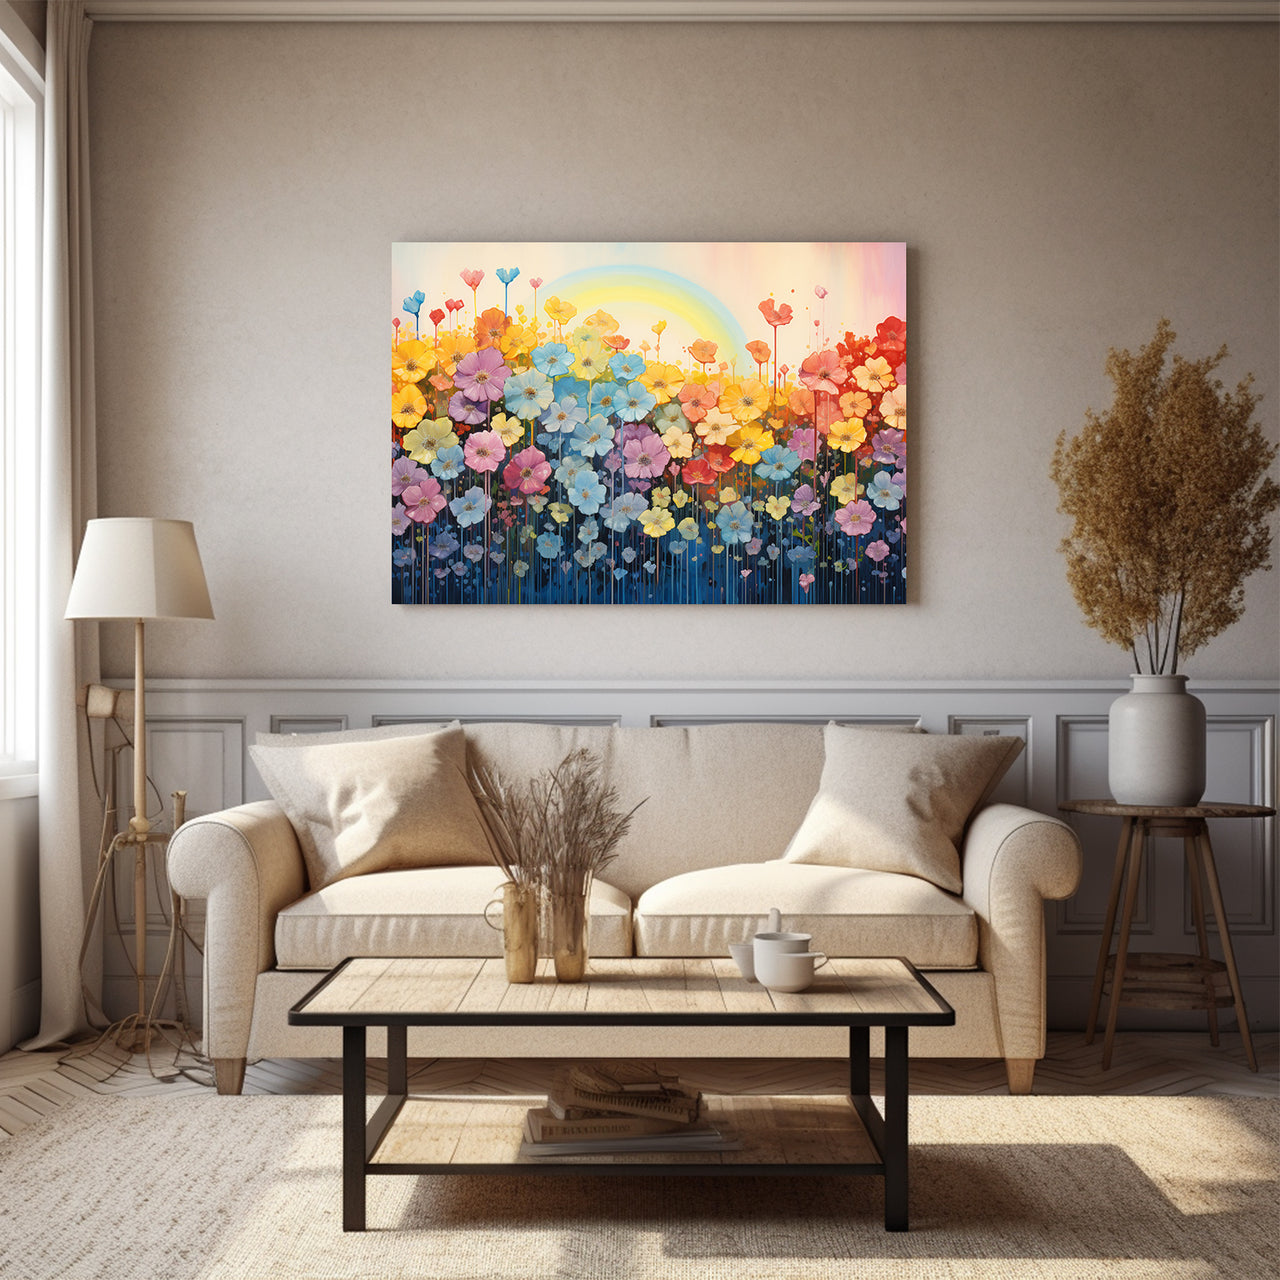 Wildflowers on Canvas, Colorful Wildflower Field Art Print 02, Minimalist Flower Wall Art, Abstract Wall Art, Watercolor flowers, Floral Print, Classic, Rustic Farmhouse, Wildflower Home Decor, Flower Painting Canvas, Floral Wall Art